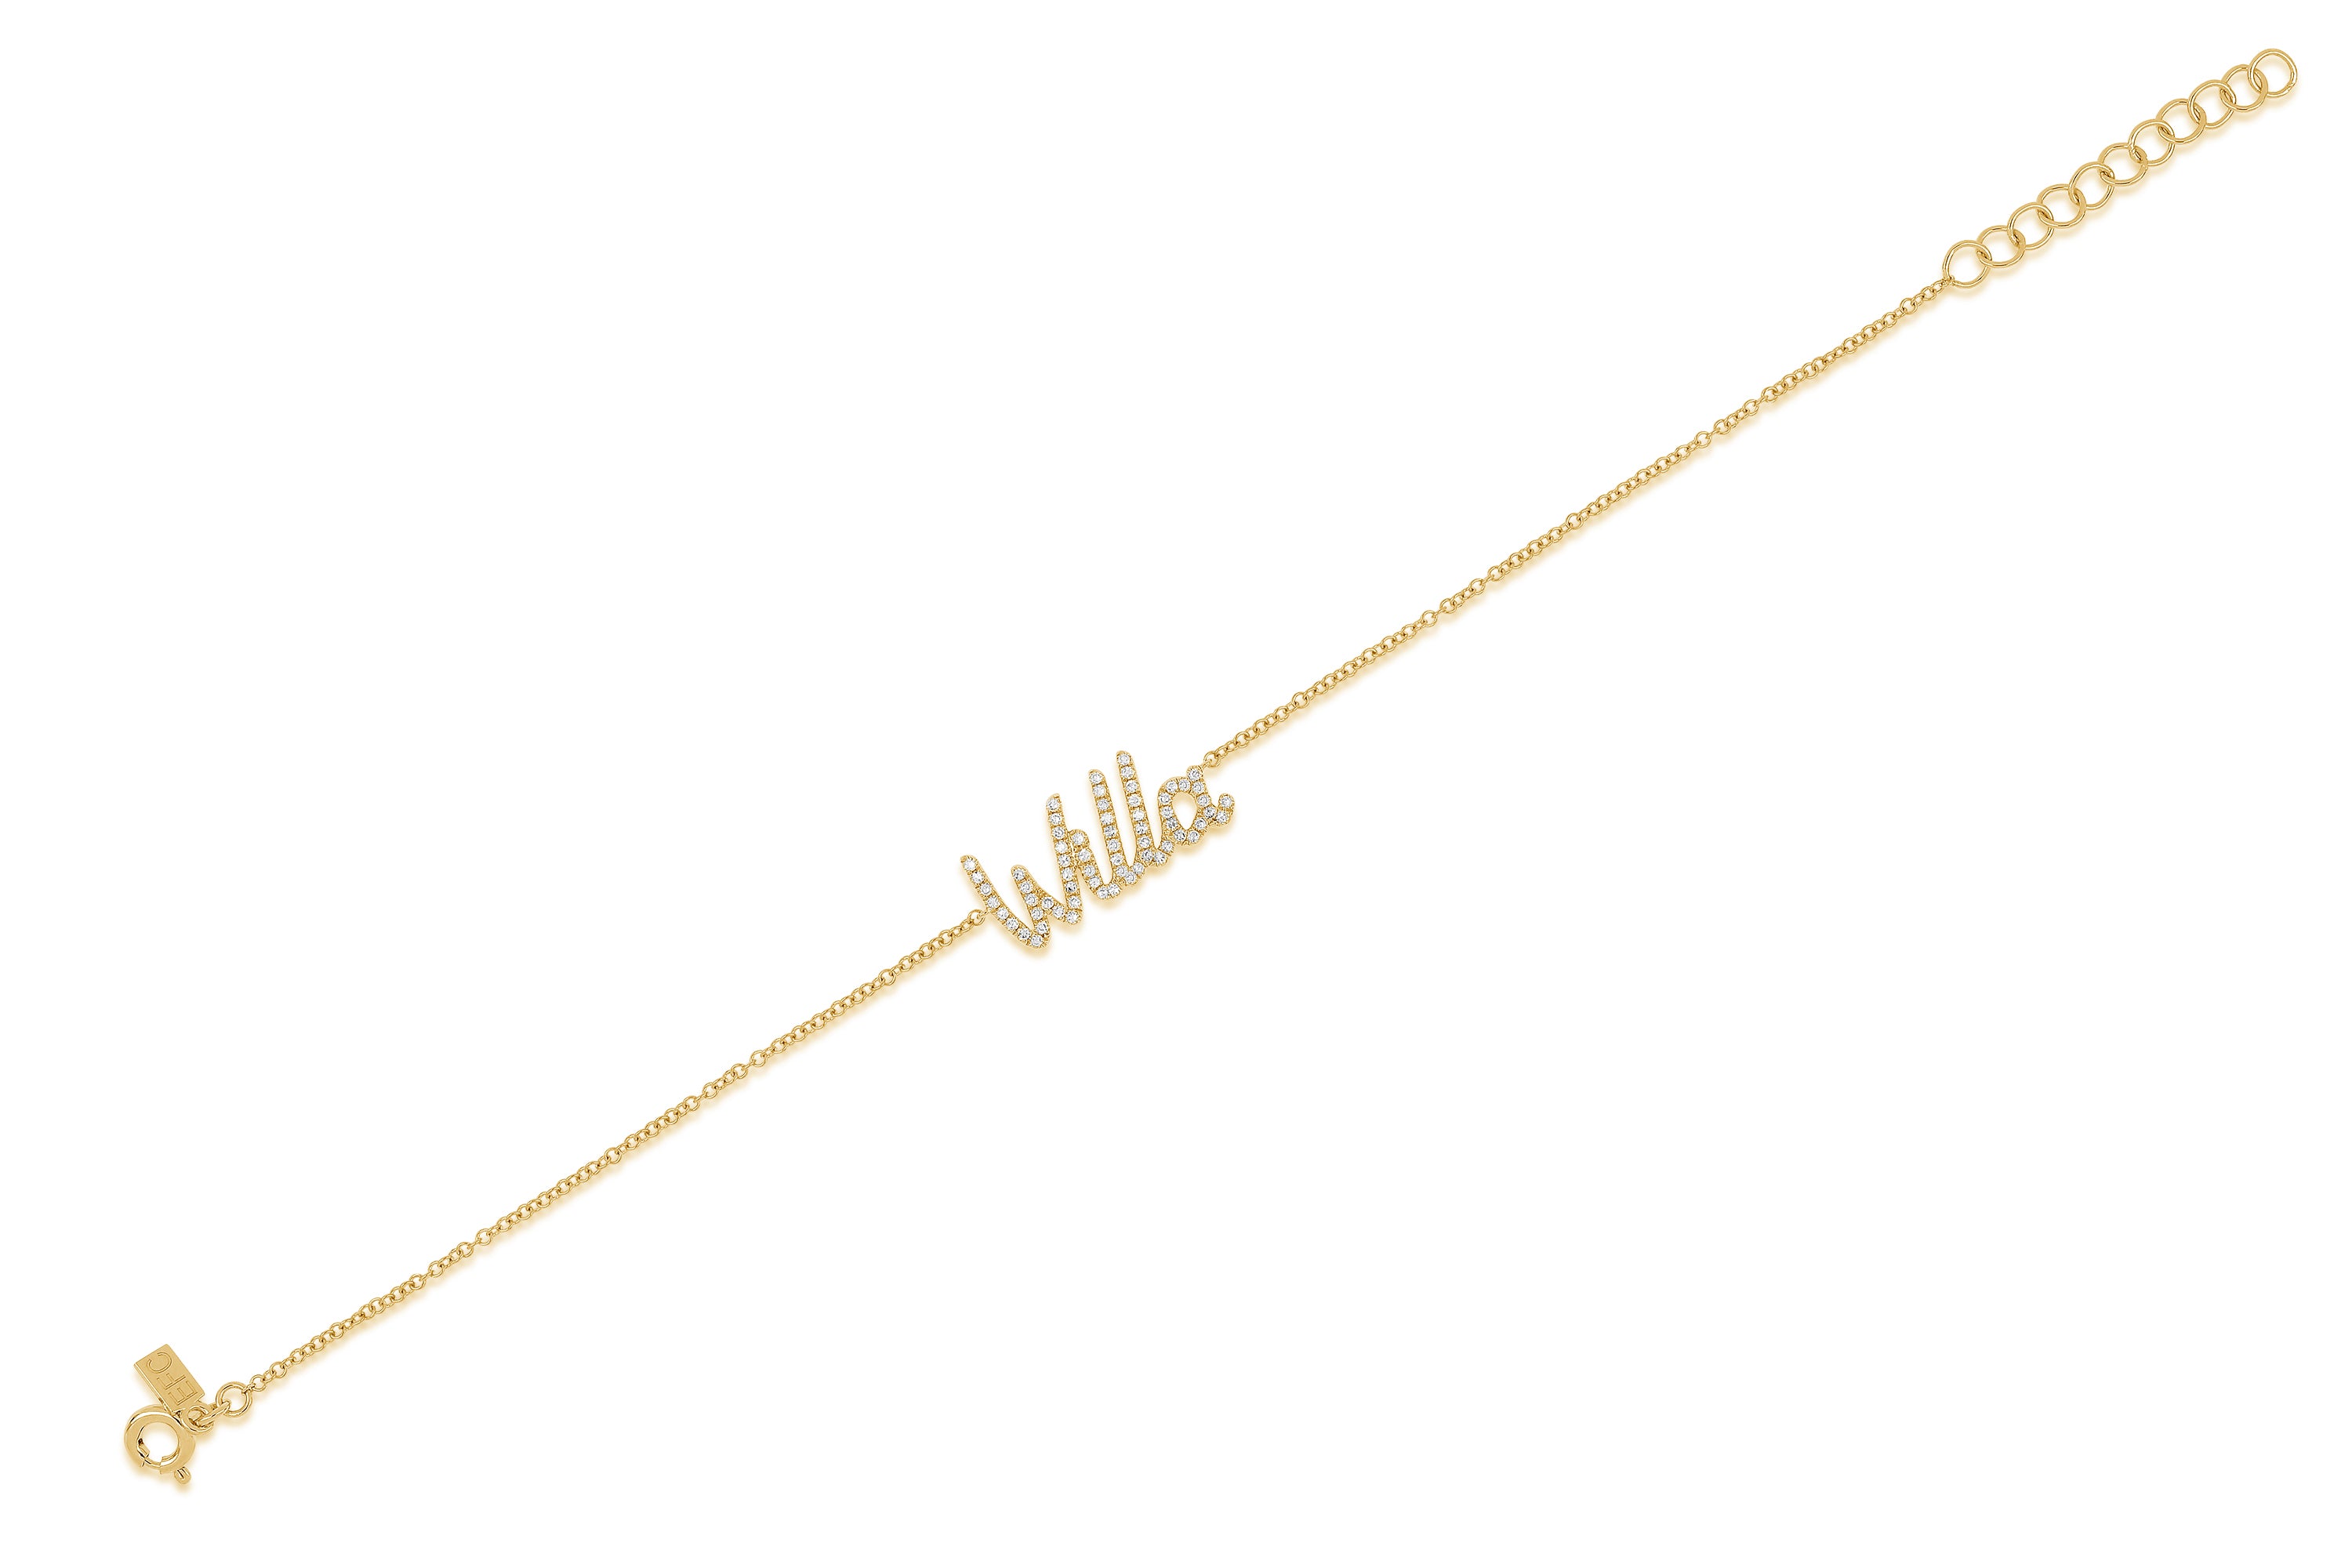 14k (karat) yellow gold bracelet with up to 10 letters of customized diamond encrusted script.